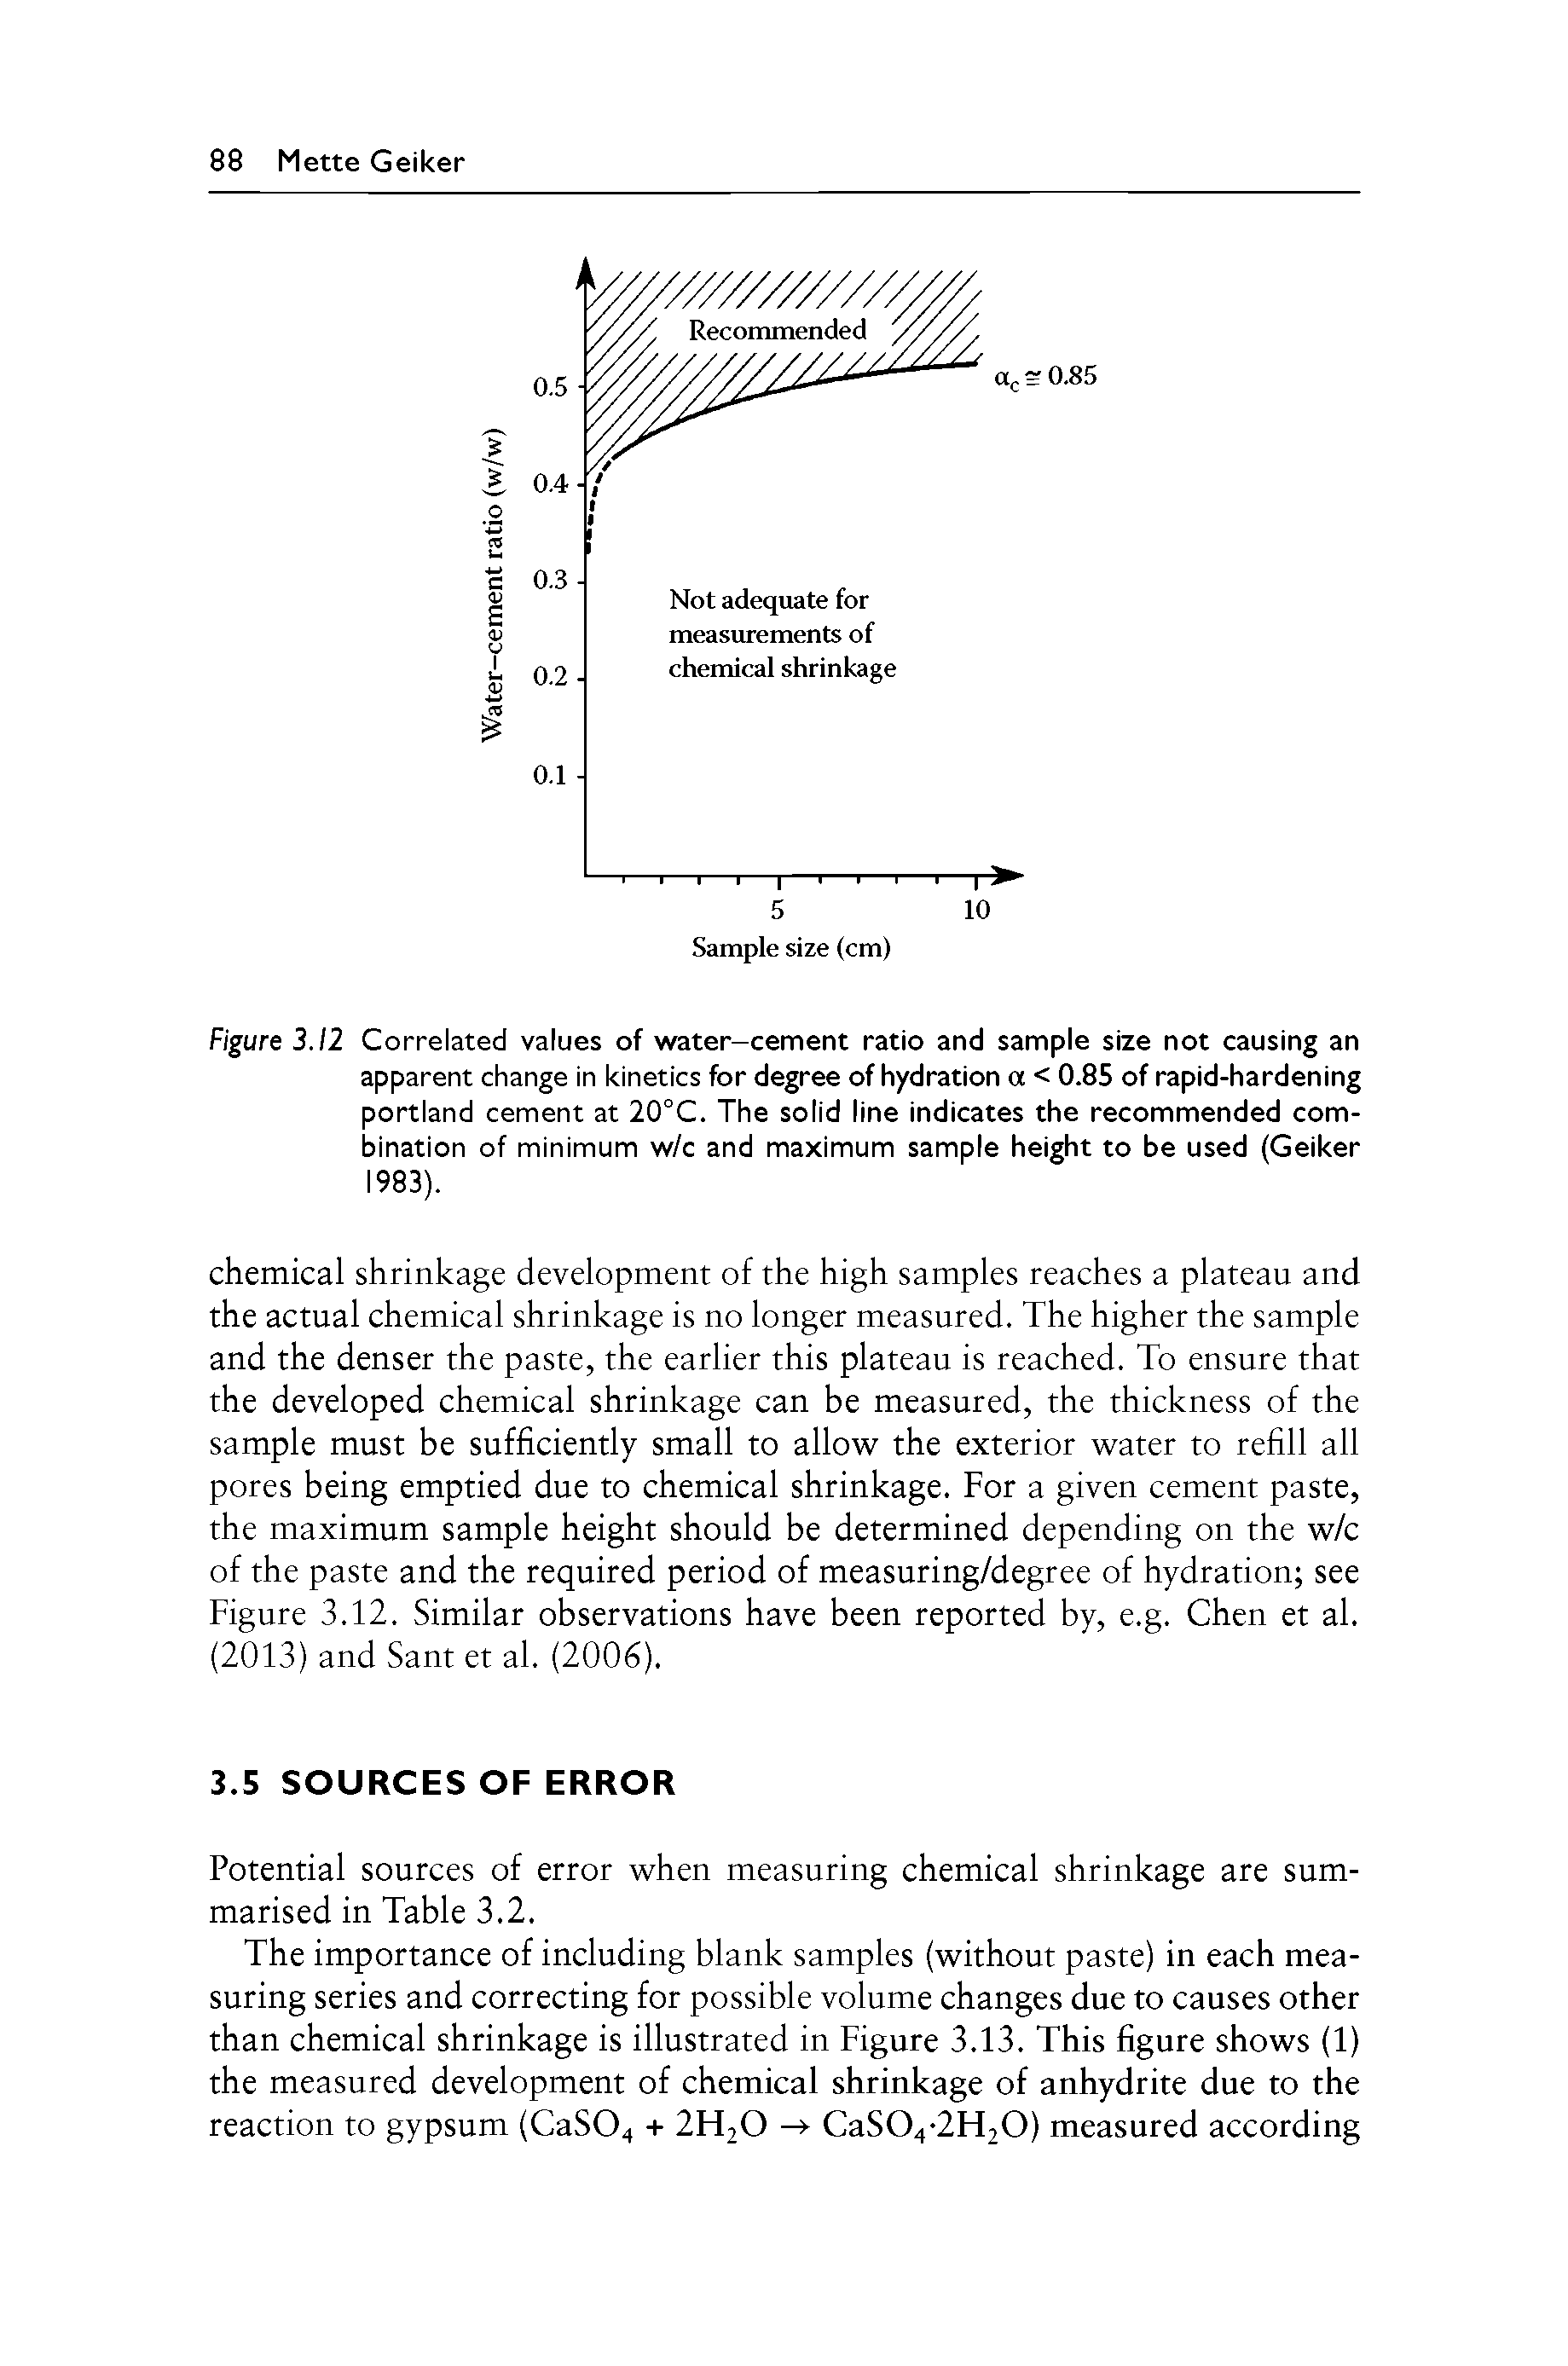 Figure 3.12 Correlated values of water-cement ratio and sample size not causing an apparent change In kinetics for degree of hydration a < 0.85 of rapid-hardening Portland cement at 20°C. The solid line indicates the recommended combination of minimum w/c and maximum sample height to be used (Geiker 1983).